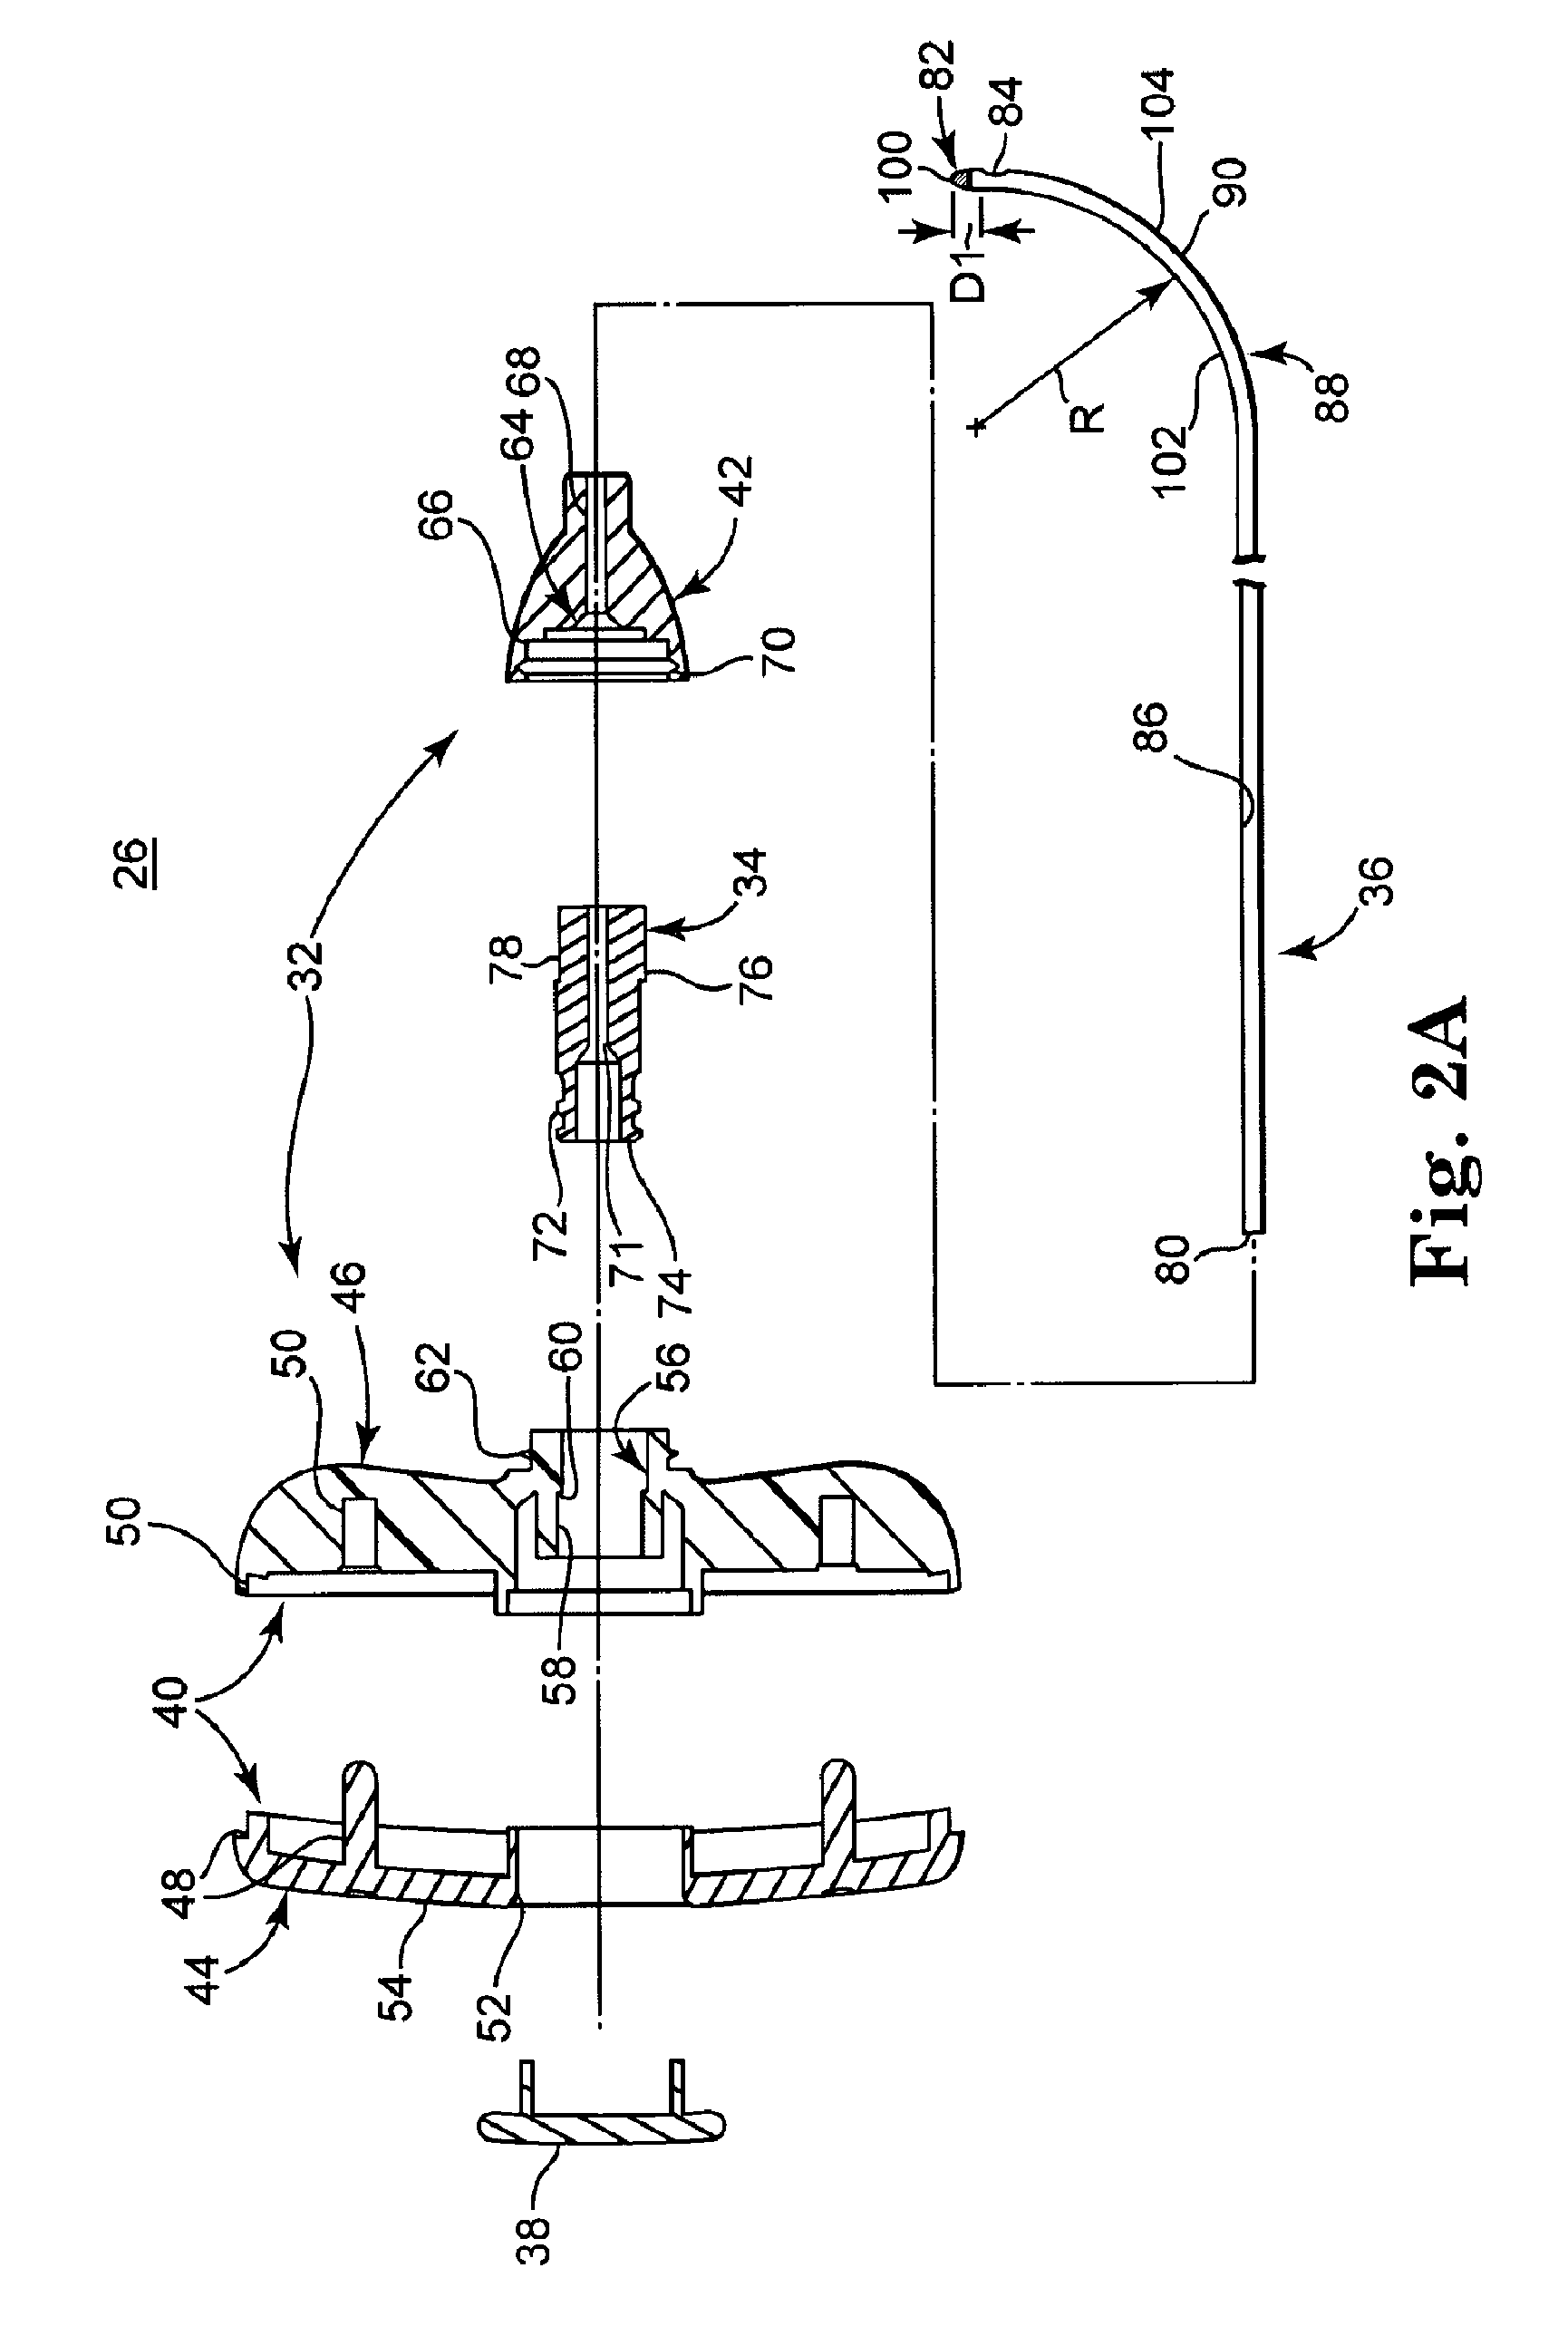 Device, system and method for delivering a curable material into bone